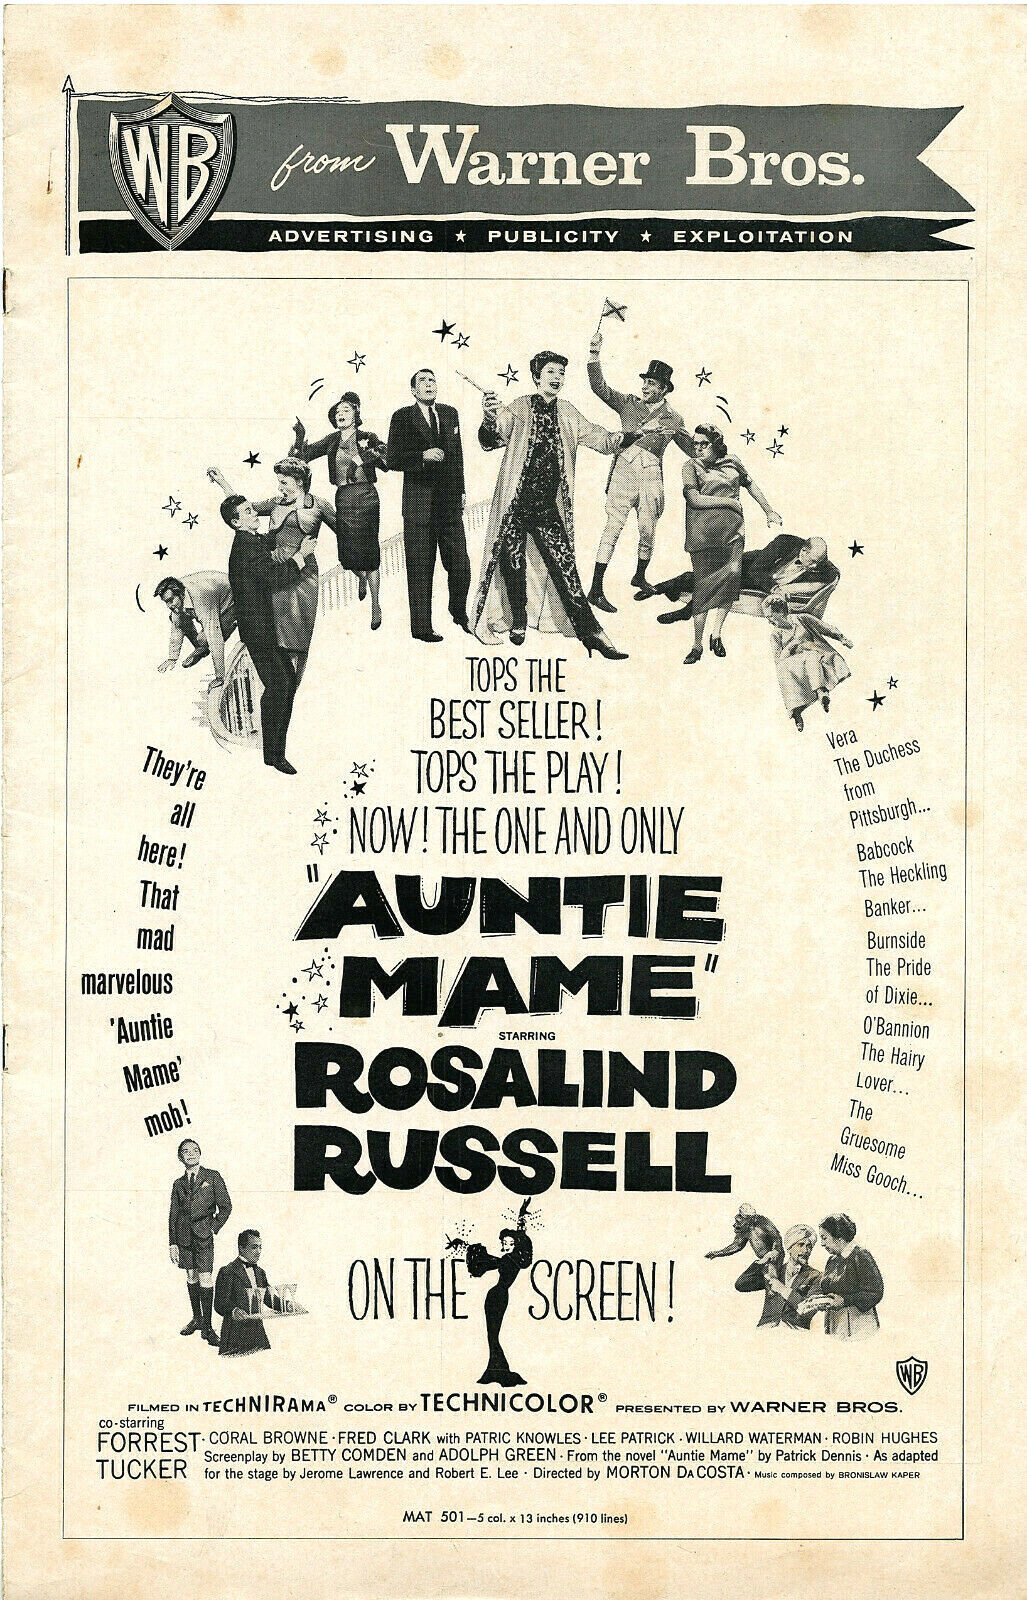 40% OFF Cheap Sale AUNTIE MAME • 1958 4 years warranty ROSALIND RUSSELL Uncut Warner Complete